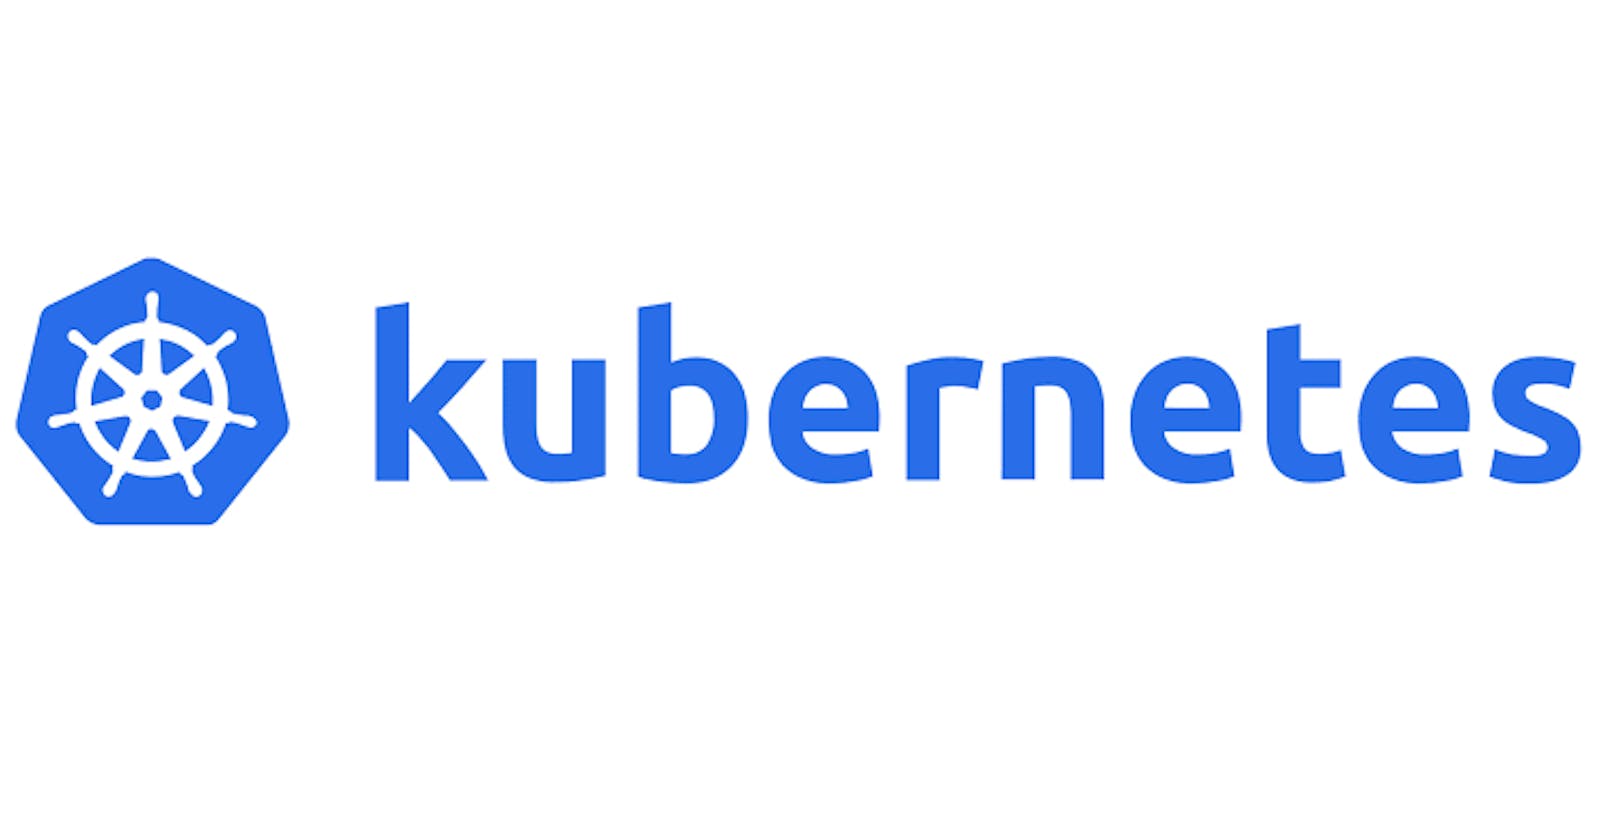 Basic Guide to Kubernetes (K8s) for New Users